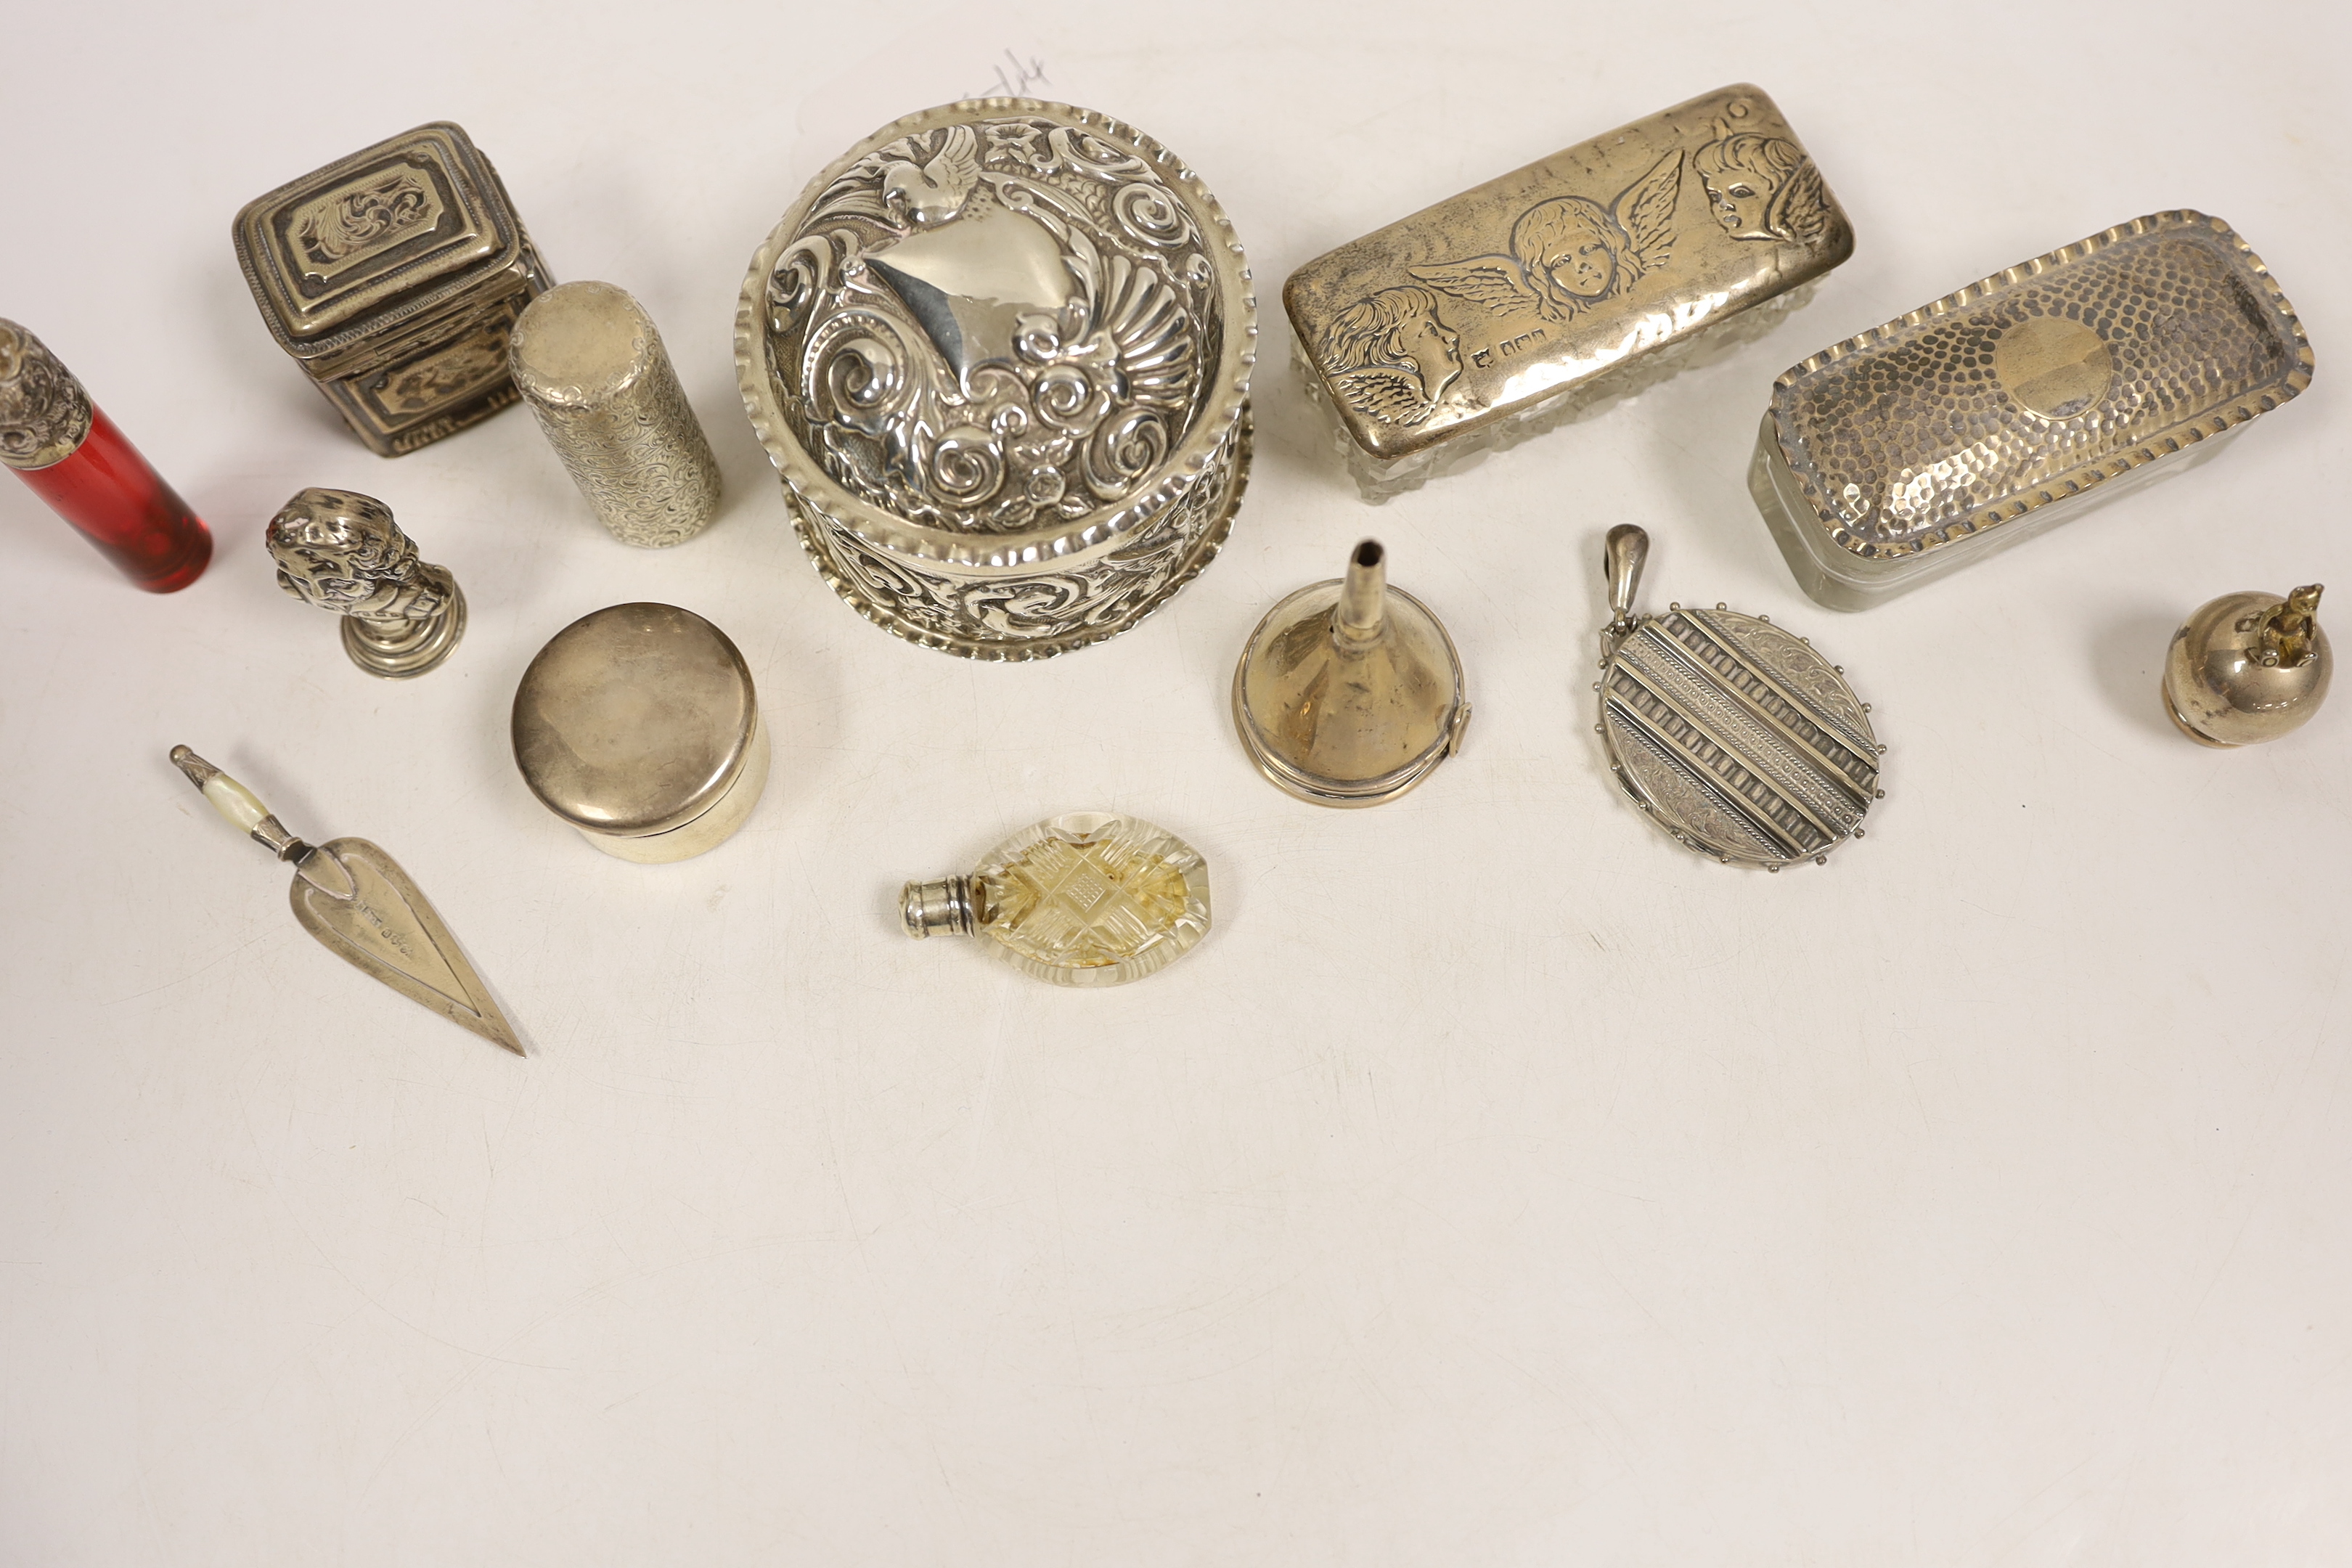 Small silver including two silver mounted glass toilet boxes, a Victorian engraved scent bottle by Sampson Mordan, a perfume funnel, Edwardian Shakespeare bust seal, repousse box and cover, locket, bookmark, etc.